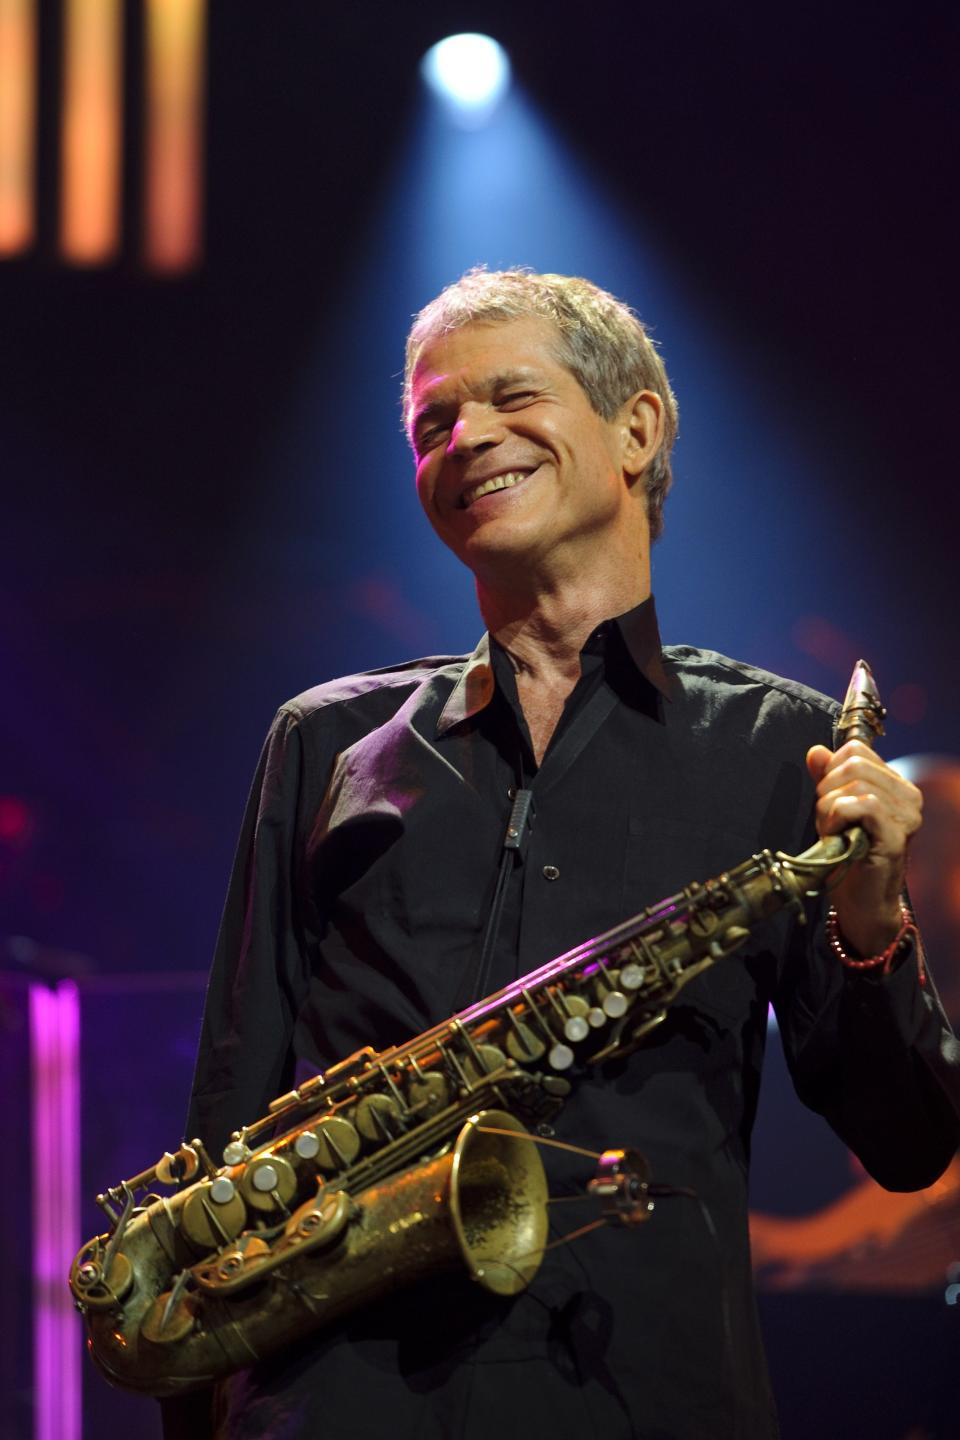 Saxophonist David Sanborn died Sunday at the age of 78 following complications from his battle with prostate cancer.